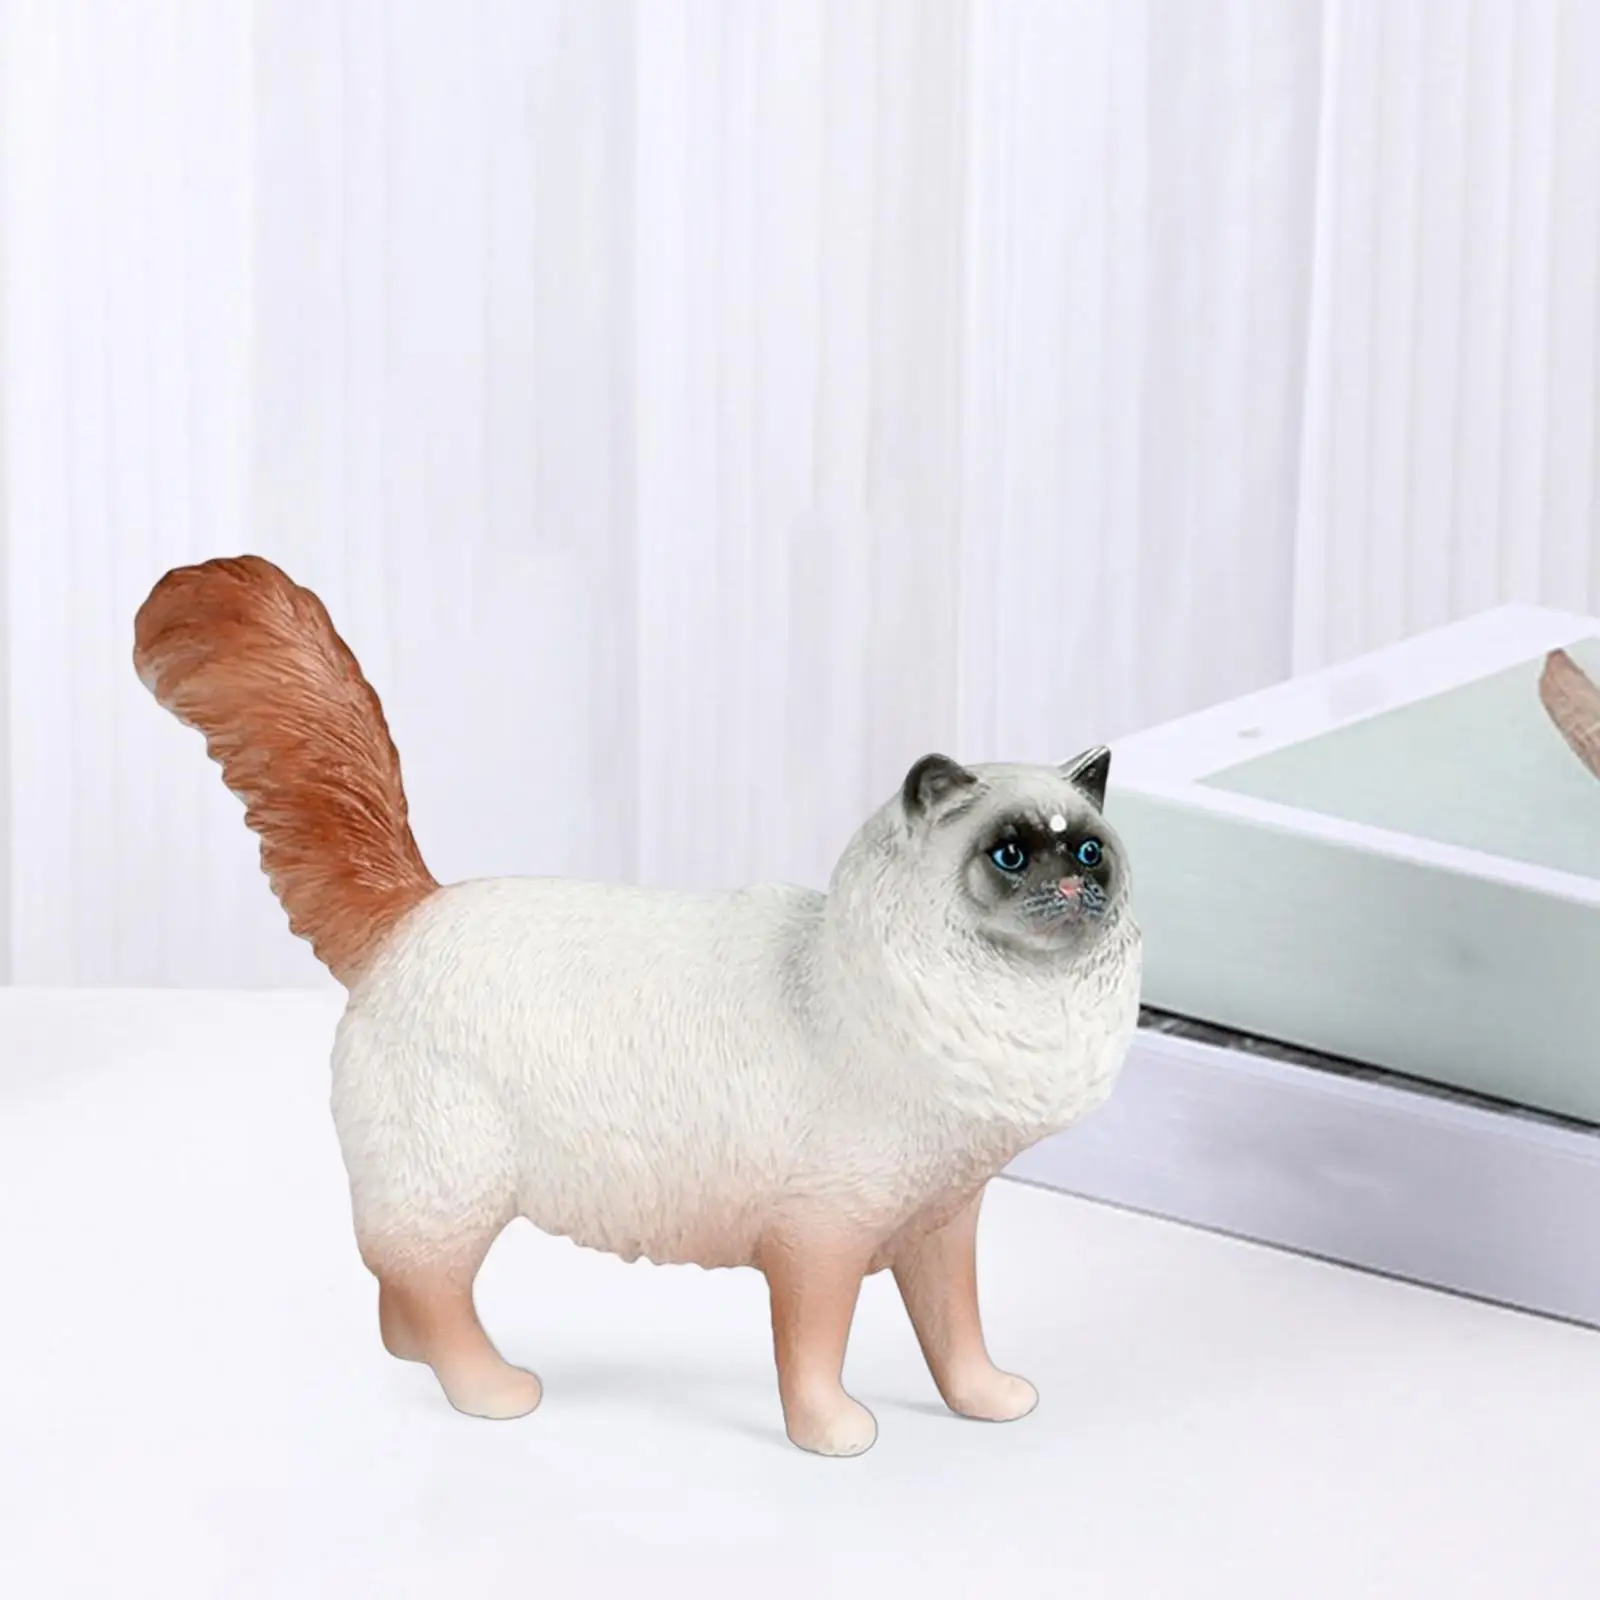 Simulation Cat Figurines Realistic Small Cat Figures Toy for Holiday Gifts